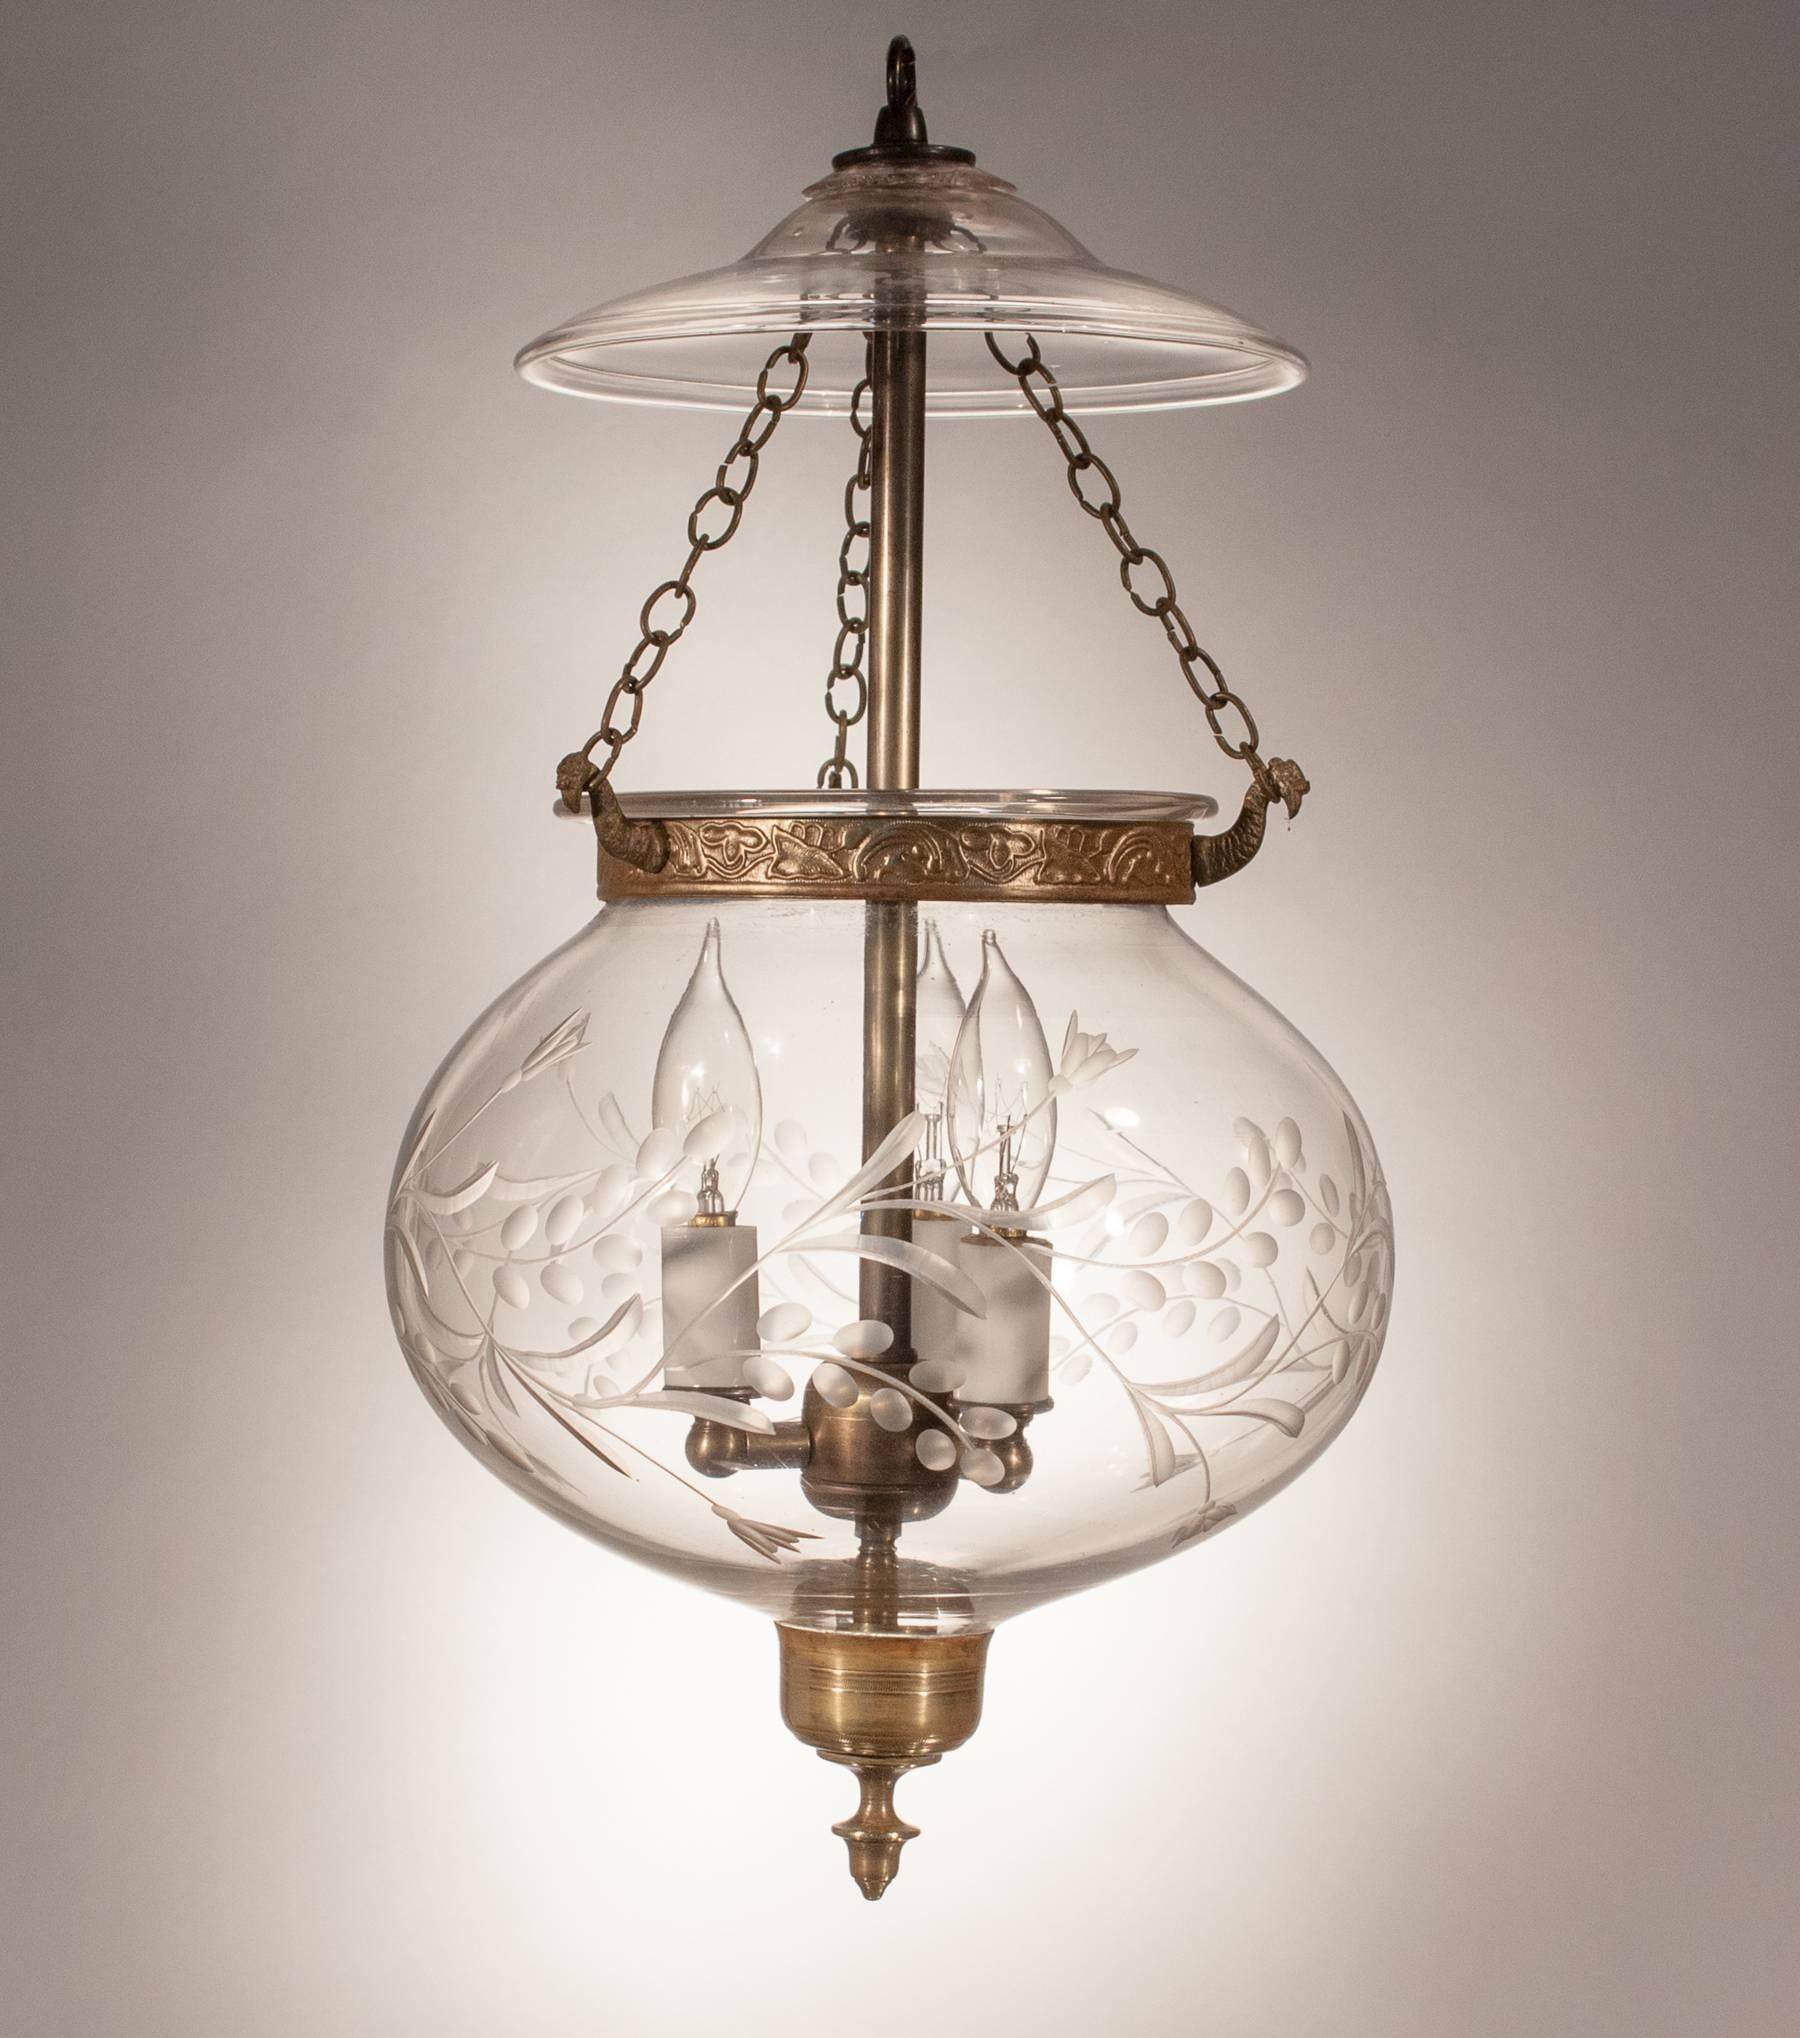 A charming 19th century handblown glass globe bell jar lantern with beautiful contours that are complemented by an etched vine motif. The hall lantern has its original brass candle holder finial base and its glass smoke bell. Its embossed brass